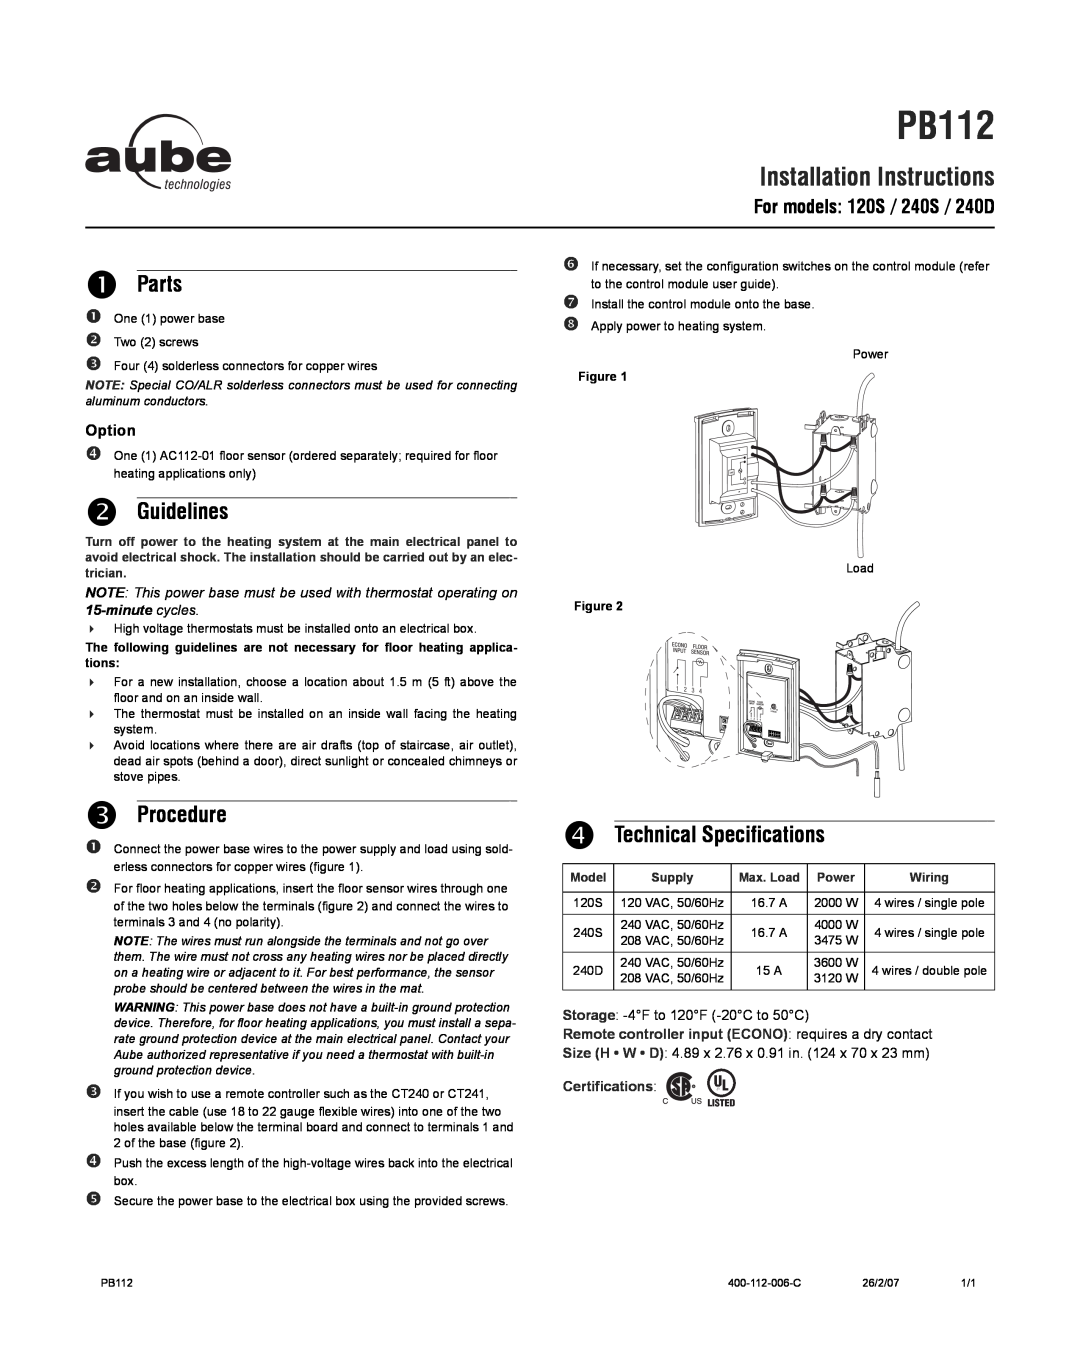 Aube Technologies TH115 n Parts, o Guidelines, p Procedure, q Technical Specifications, For models 120S / 240S / 240D 